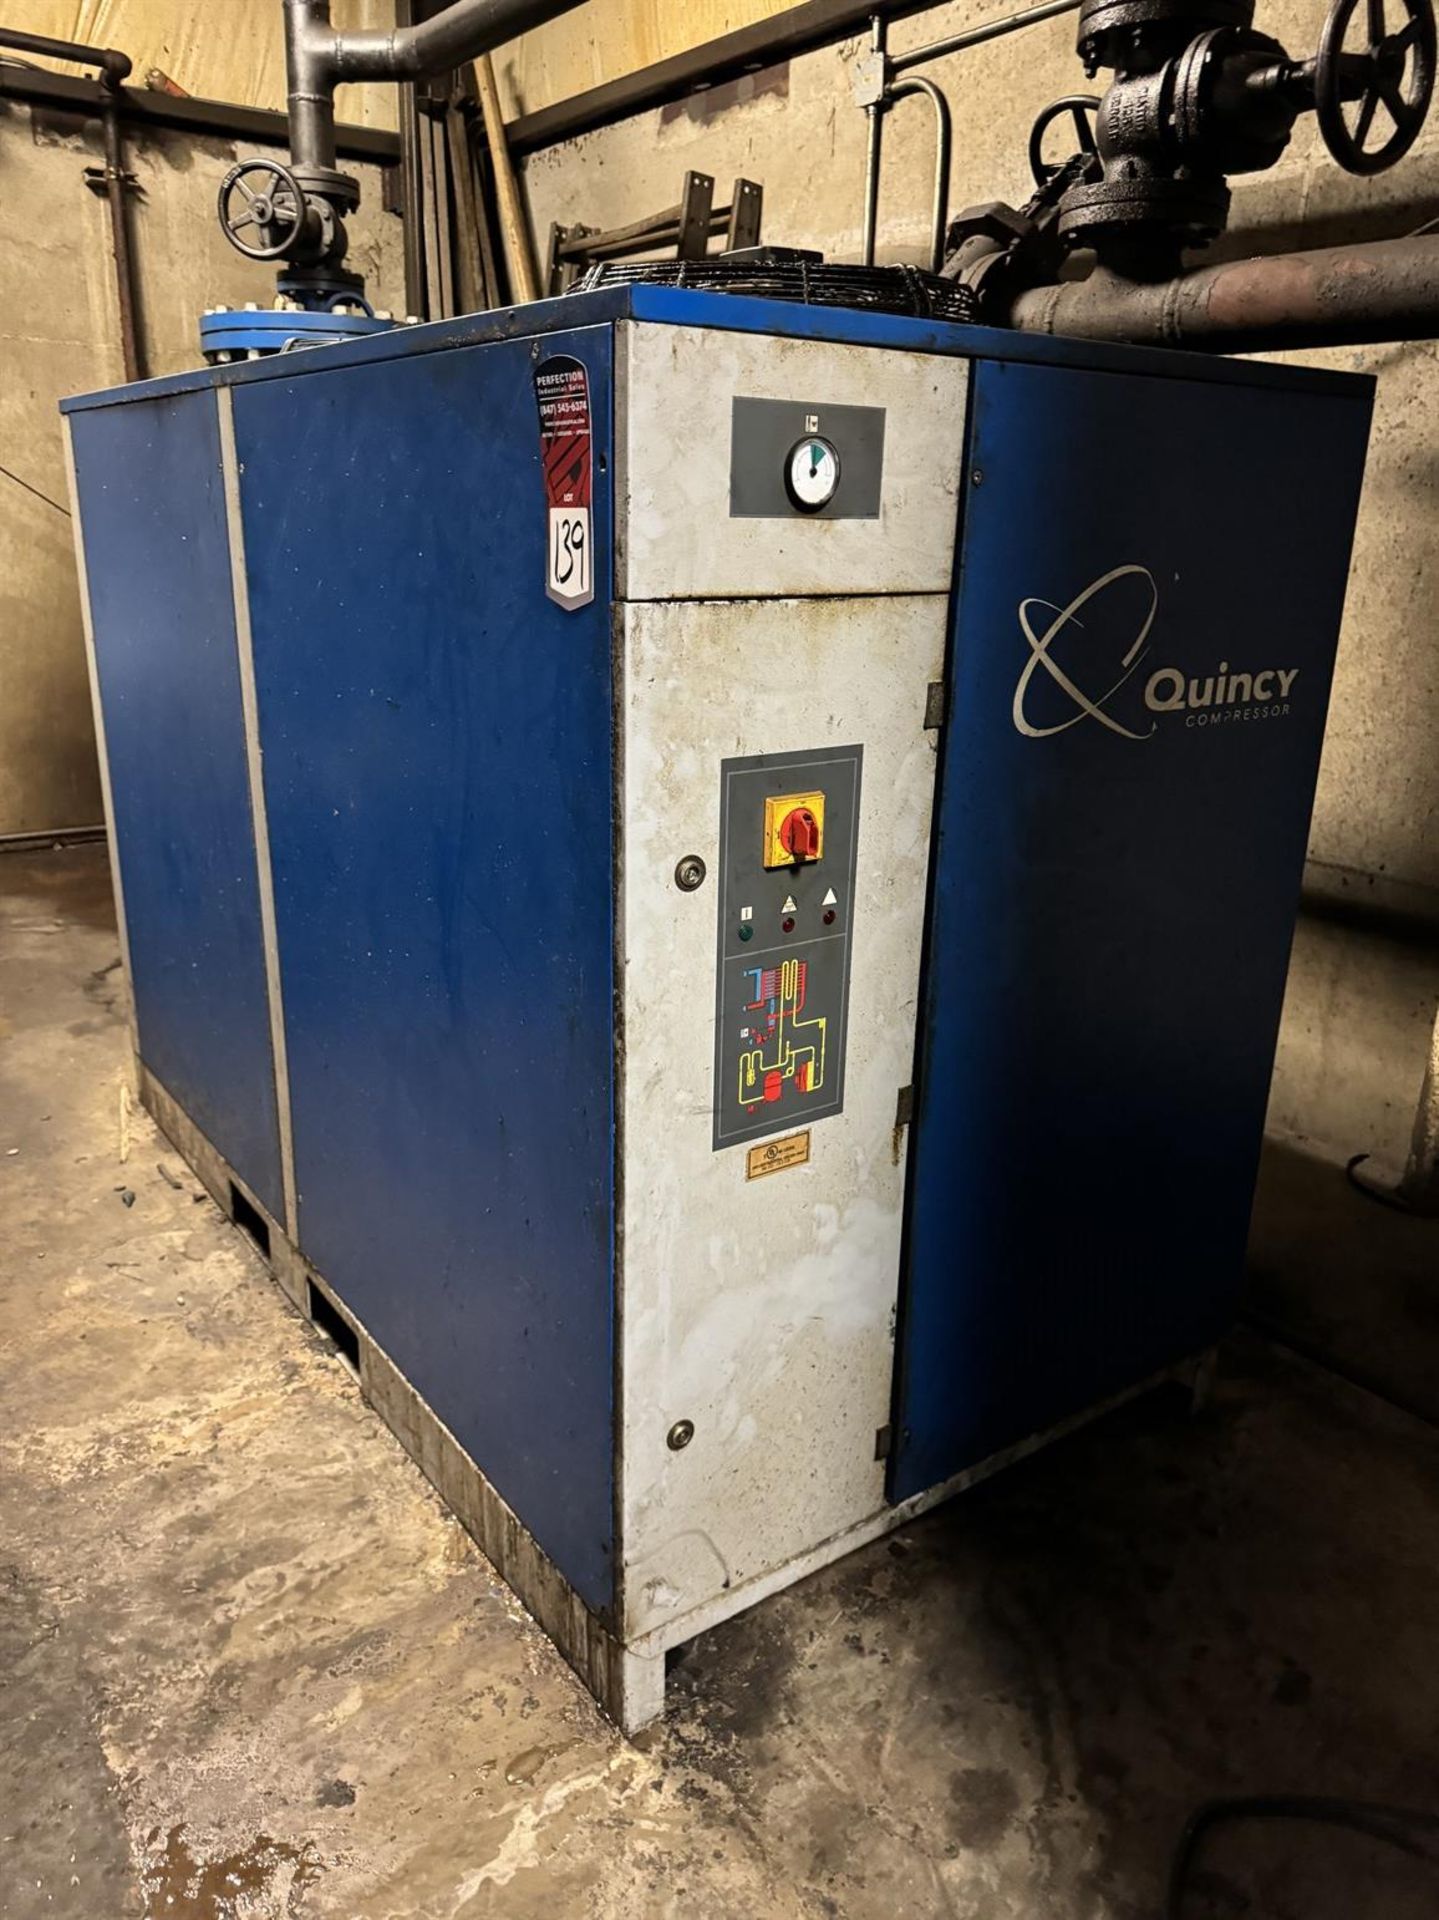 2013 QUINCY QPNC-2200(A19) UL Refrigerated Air Dryer, s/n CAI654976